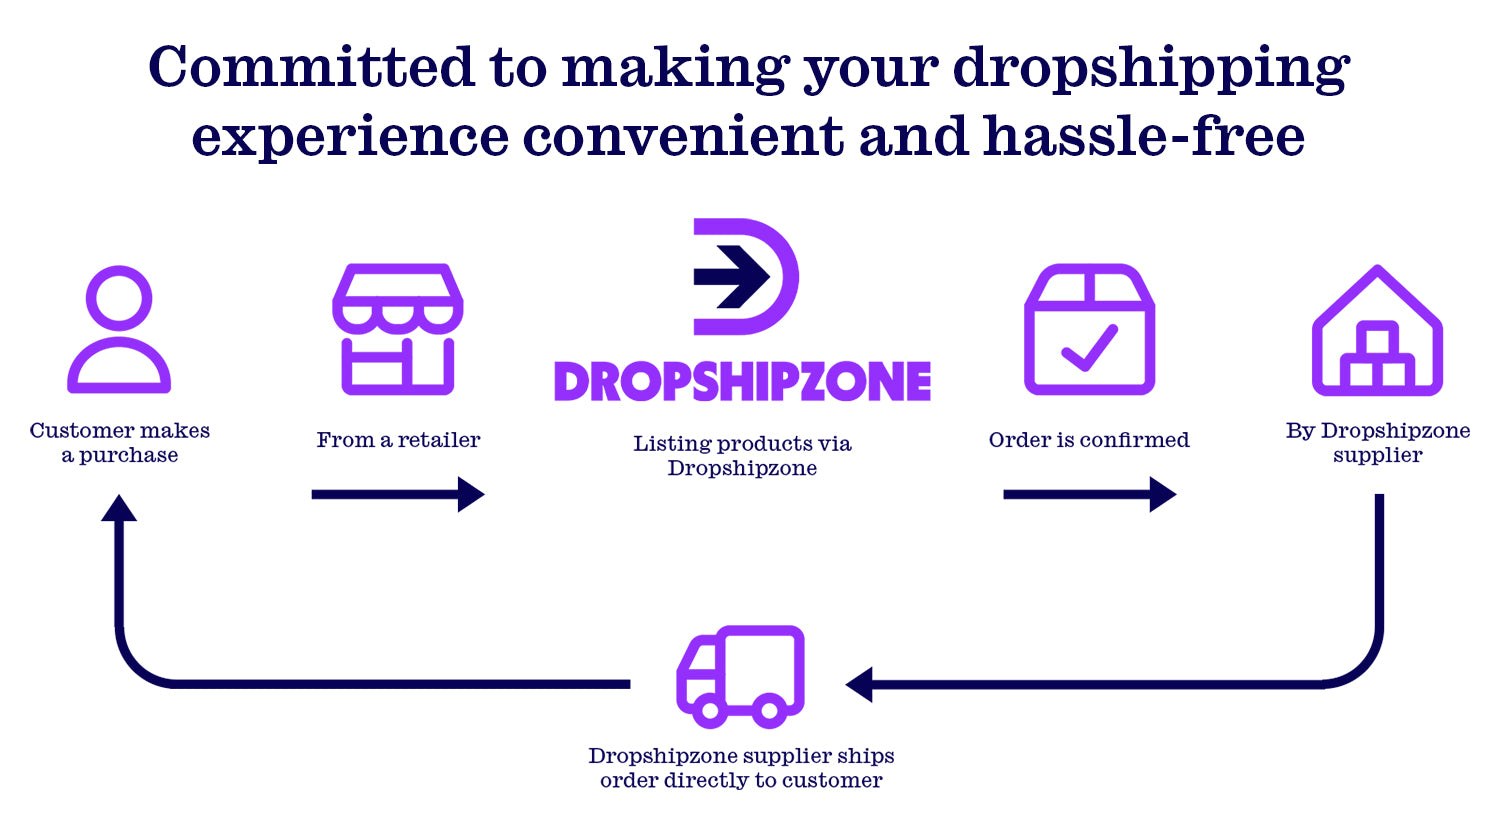 Working with Dropshipzone means hassle-free dropshipping because they facilitate all the transactions between retailers and trusted suppliers.